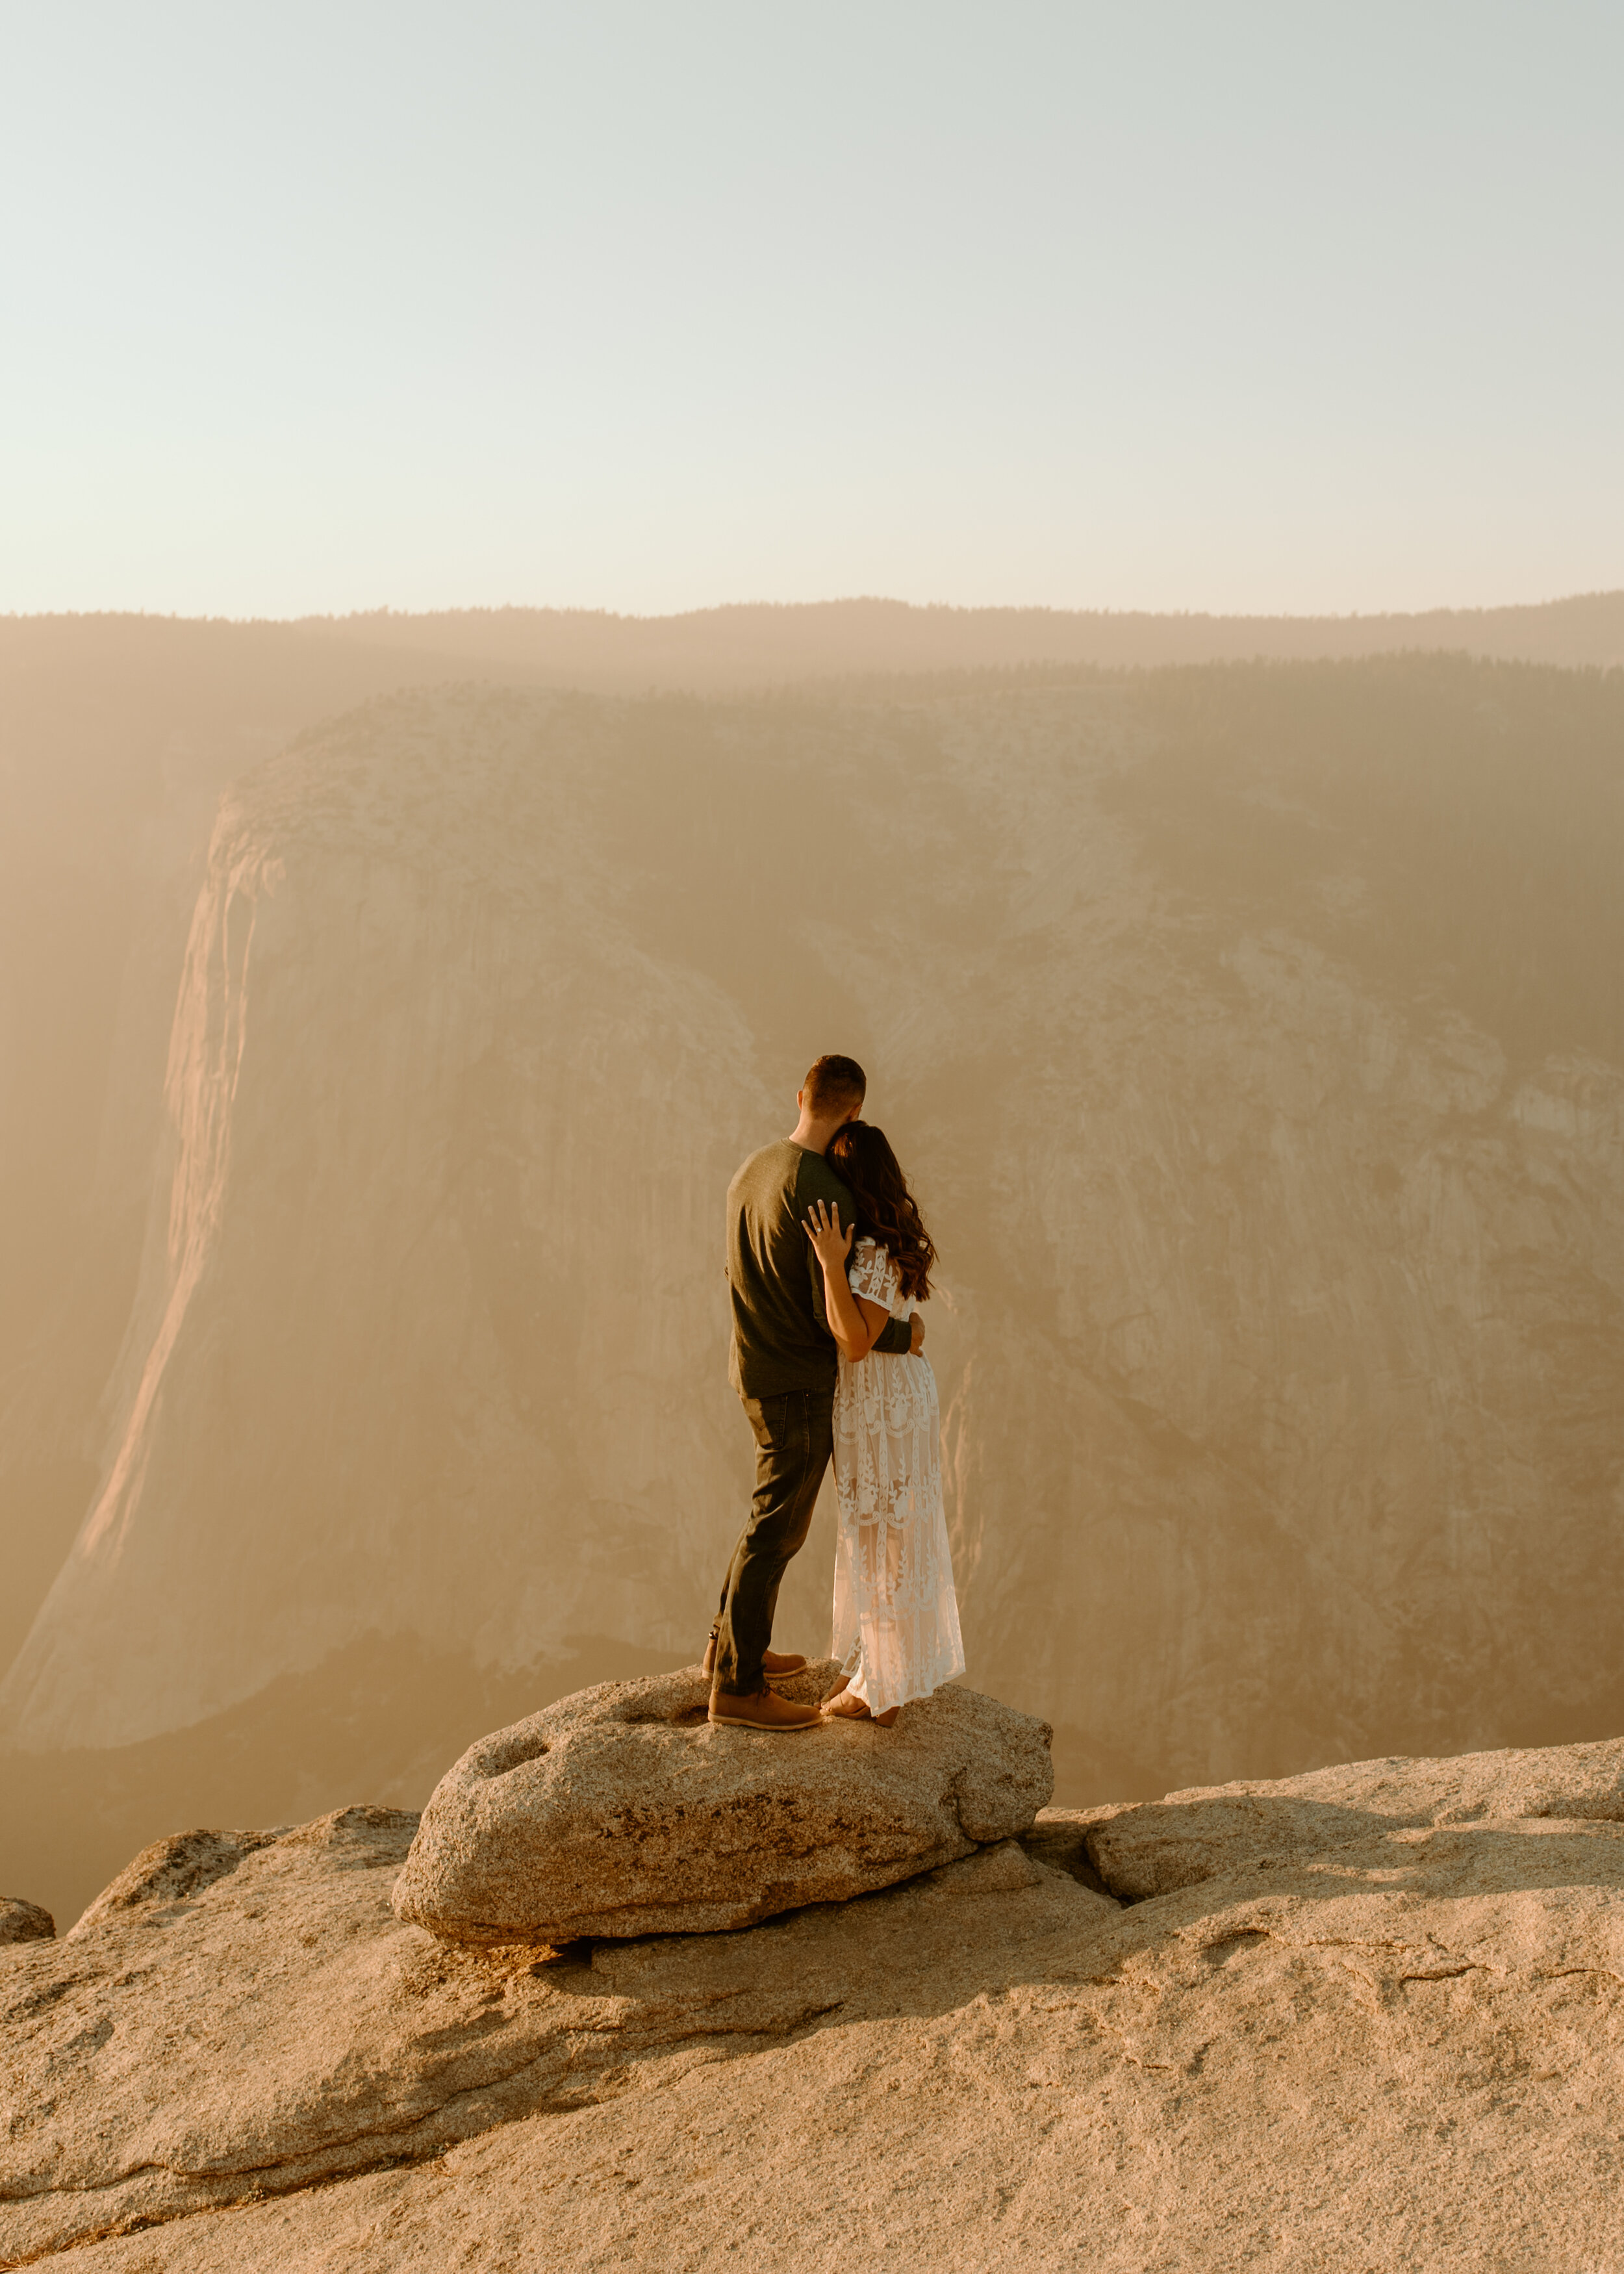 Yosemite National Park | Best places to elope in California | Destination elopement photographer | Elopement planning tips 